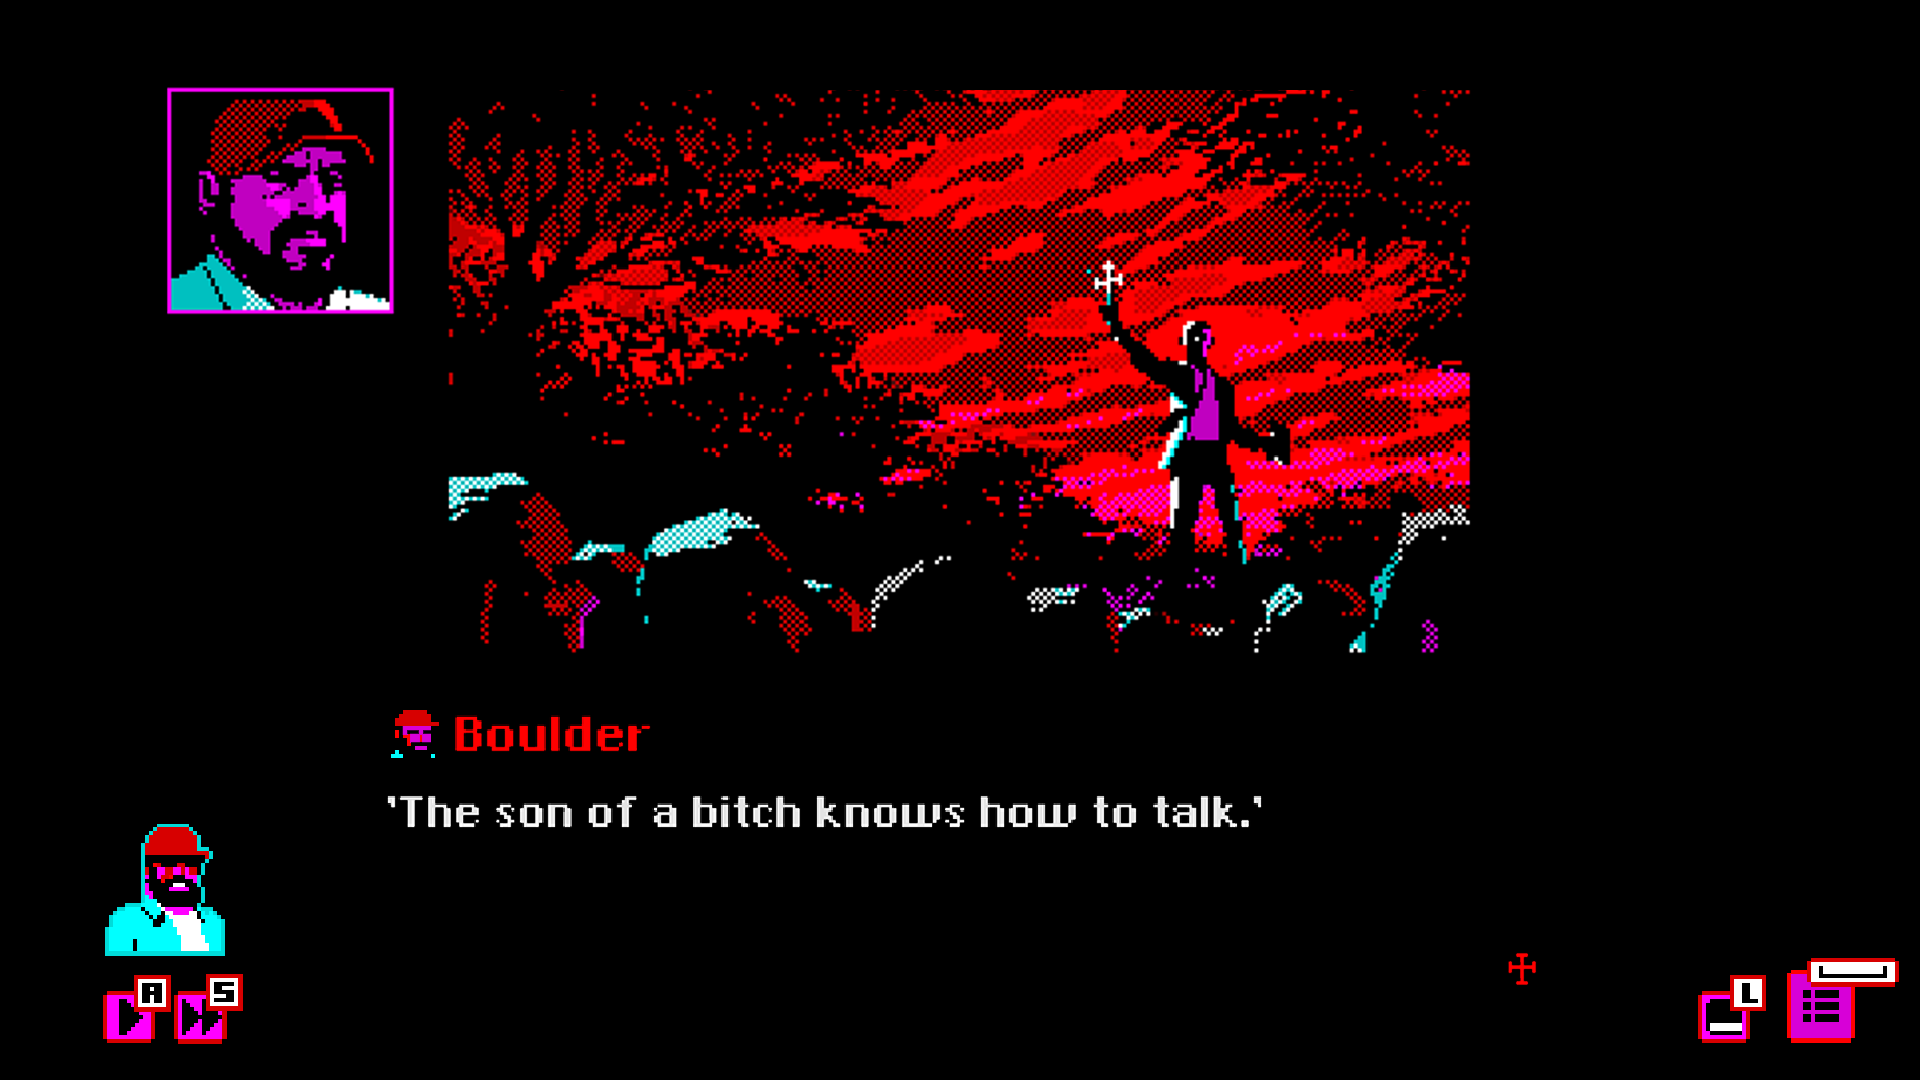 A screenshot from Bahnsen Knights. A man is standing on stage in front of a crowd of people, holding a cross. Boulder states, "the son of a bitch knows how to talk."